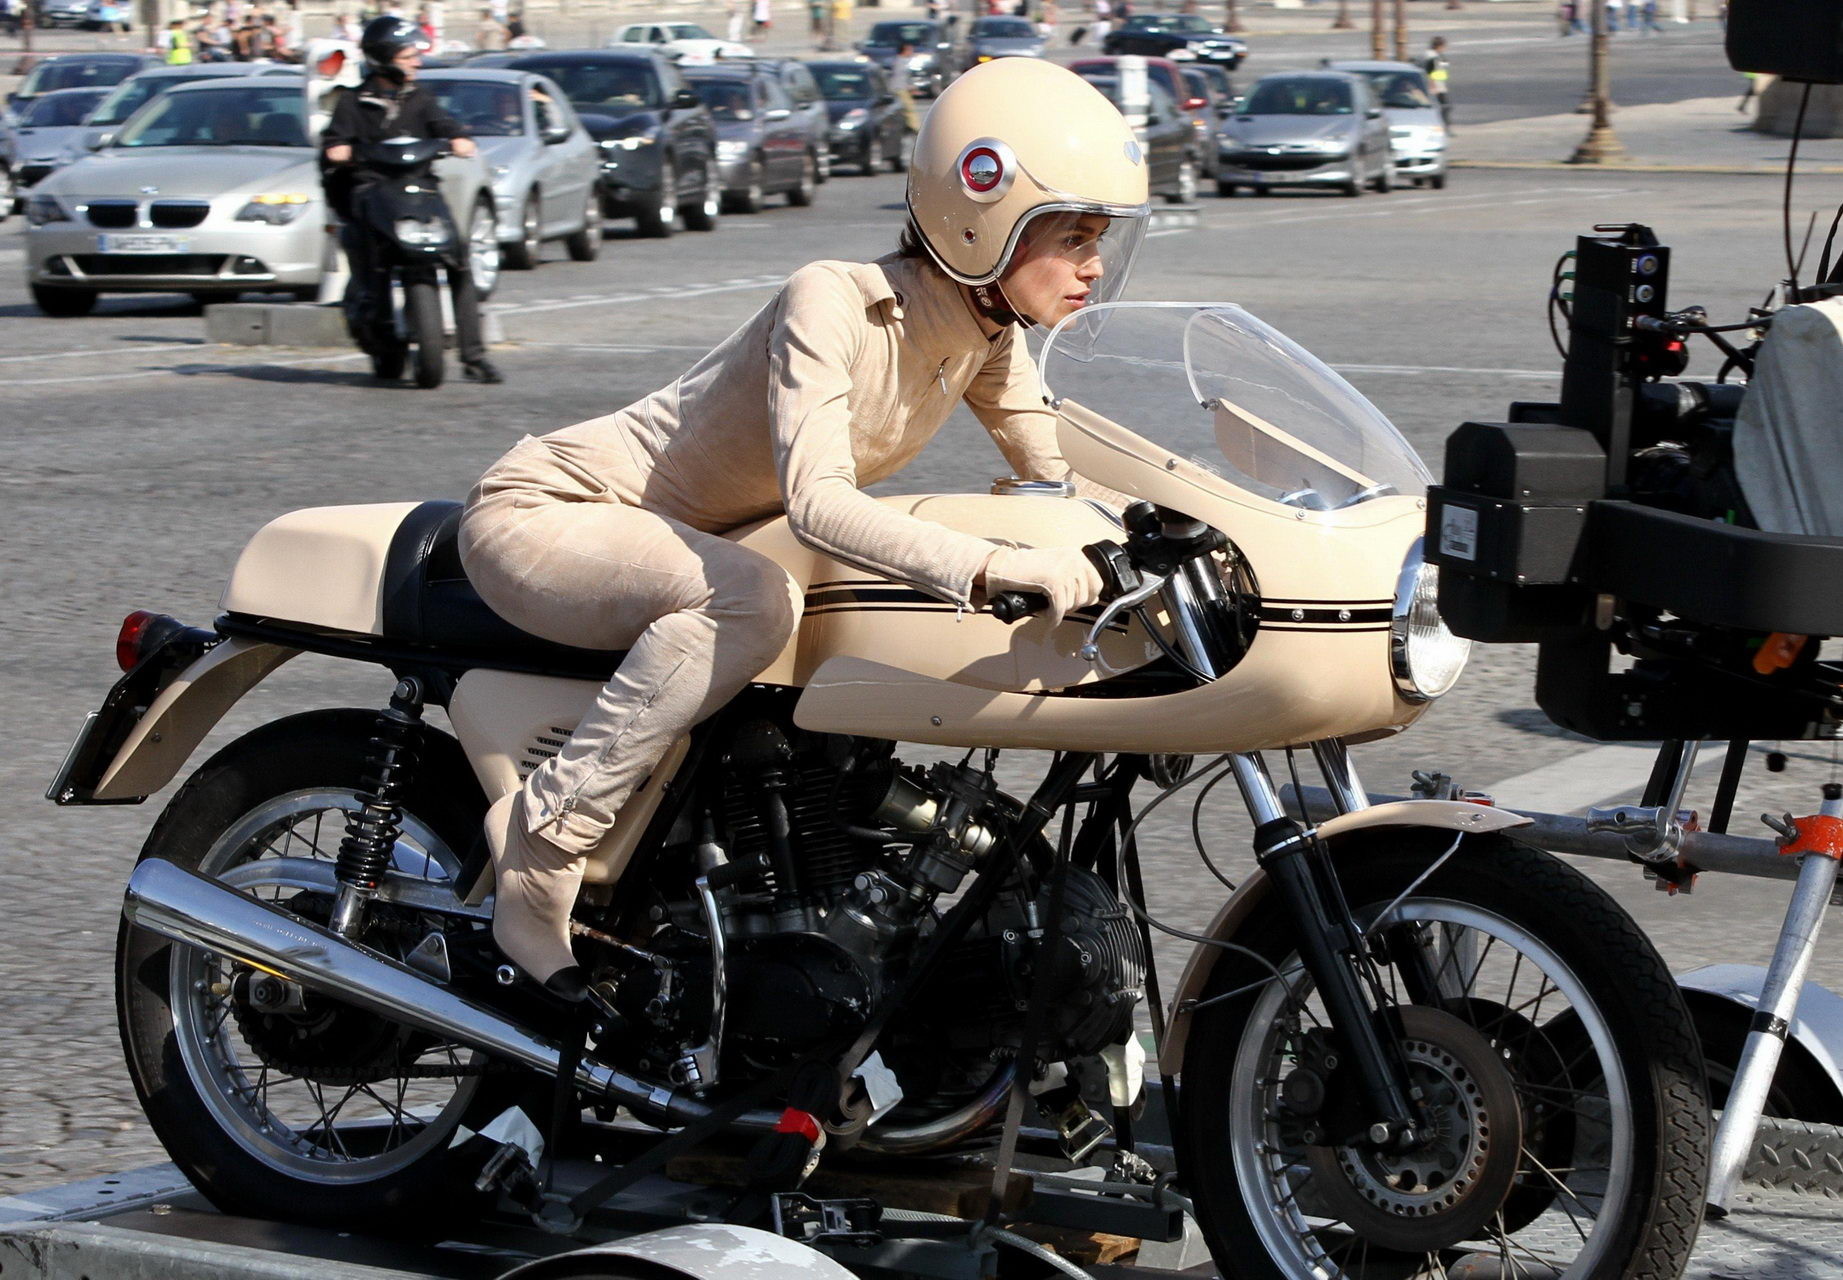 Keira Knightley in tight retro motorcycle suit shooting a commercial in Paris #75334768